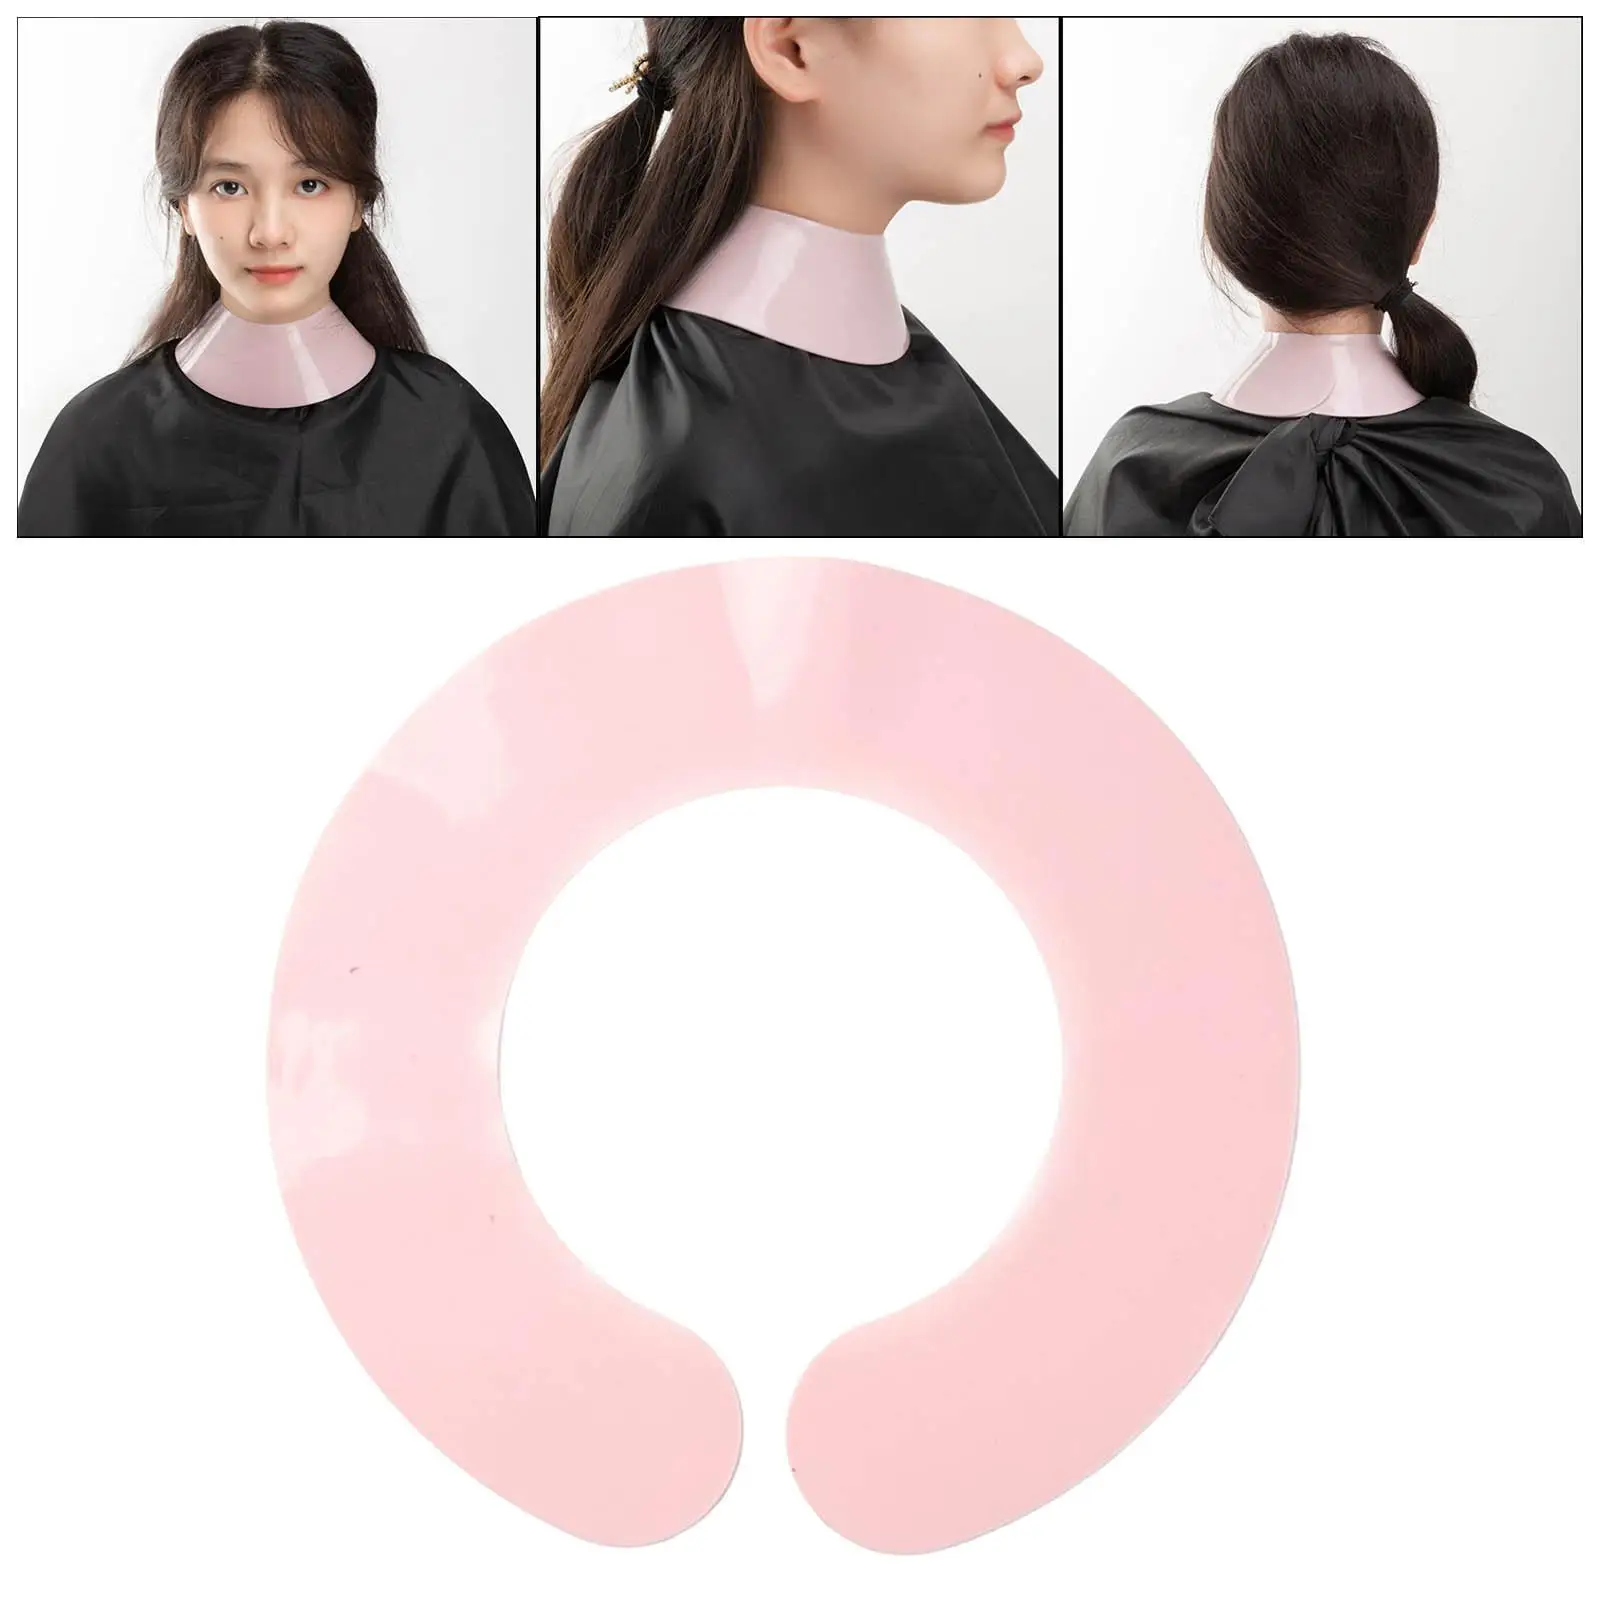 Waterproof Hair Cutting Collar Silicone Neck Guard Professional Neck Wrap for Hair Dyeing Adjustable Closure for Adults Kids